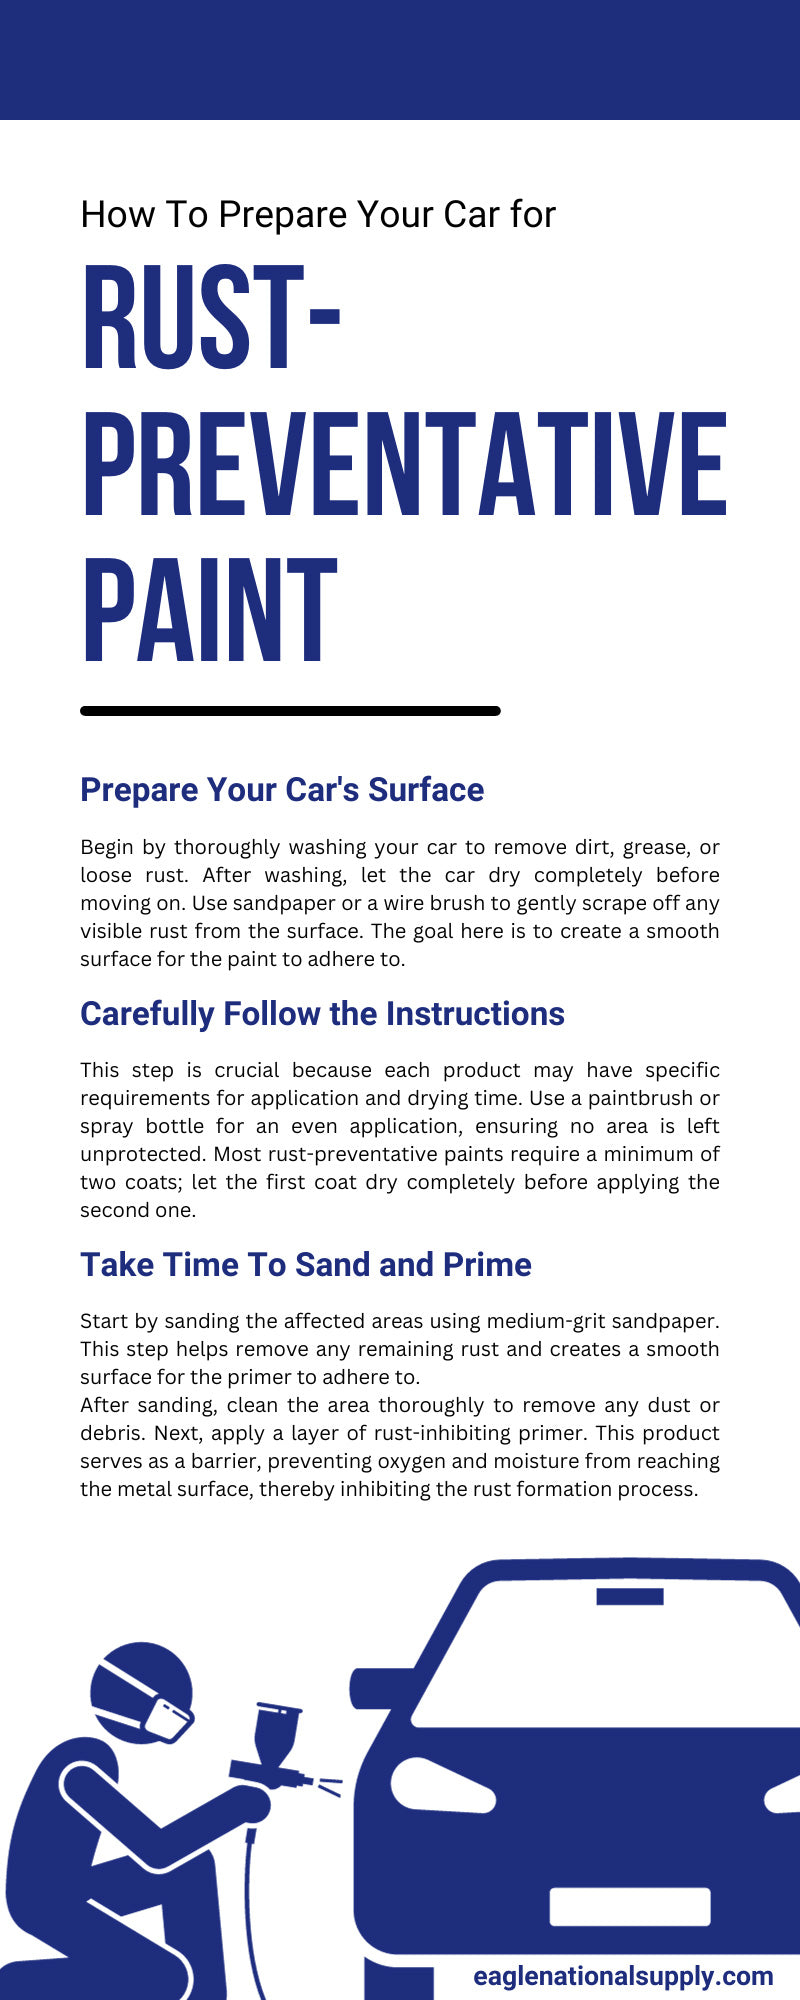 How To Prepare Your Car for Rust-Preventative Paint